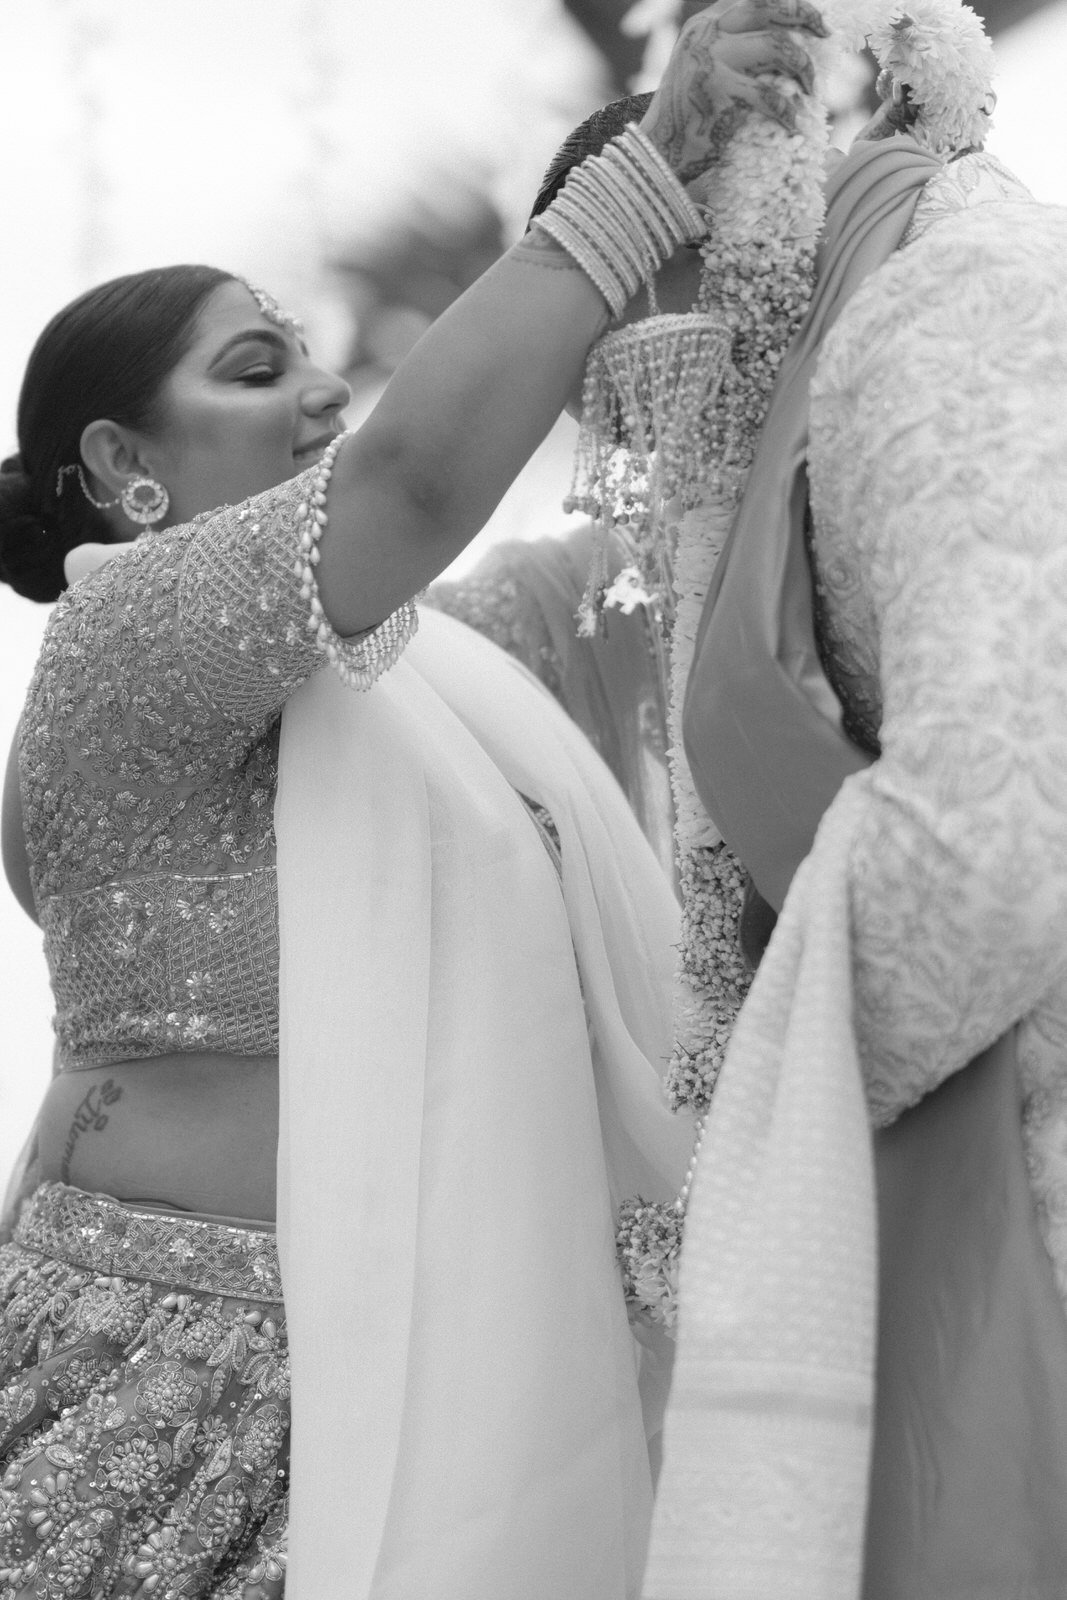 Luxury Indian Wedding in Miami Florida - Indian wedding photographer miami florida - michelle gonzalez photography - loews hotel in coral gables wedding-67.jpg